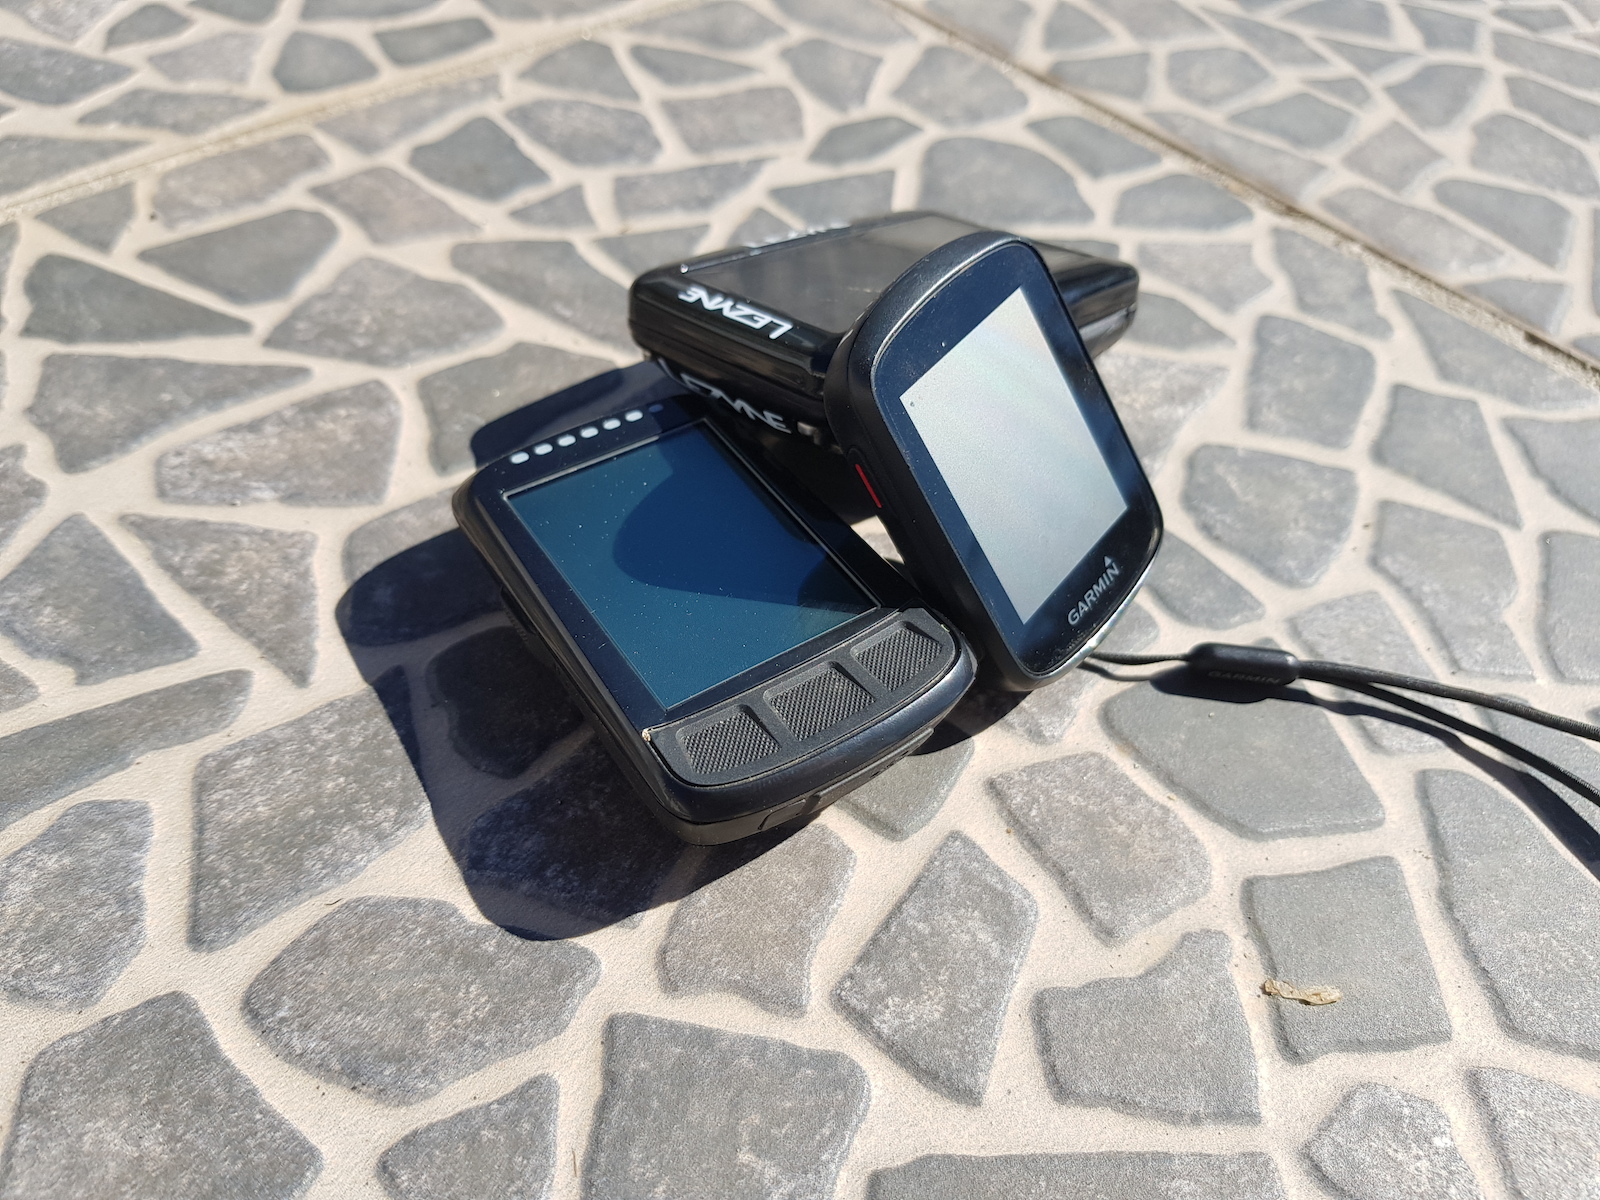 The Garmin eTrex Solar Review: Cut the Cord and Get Lost